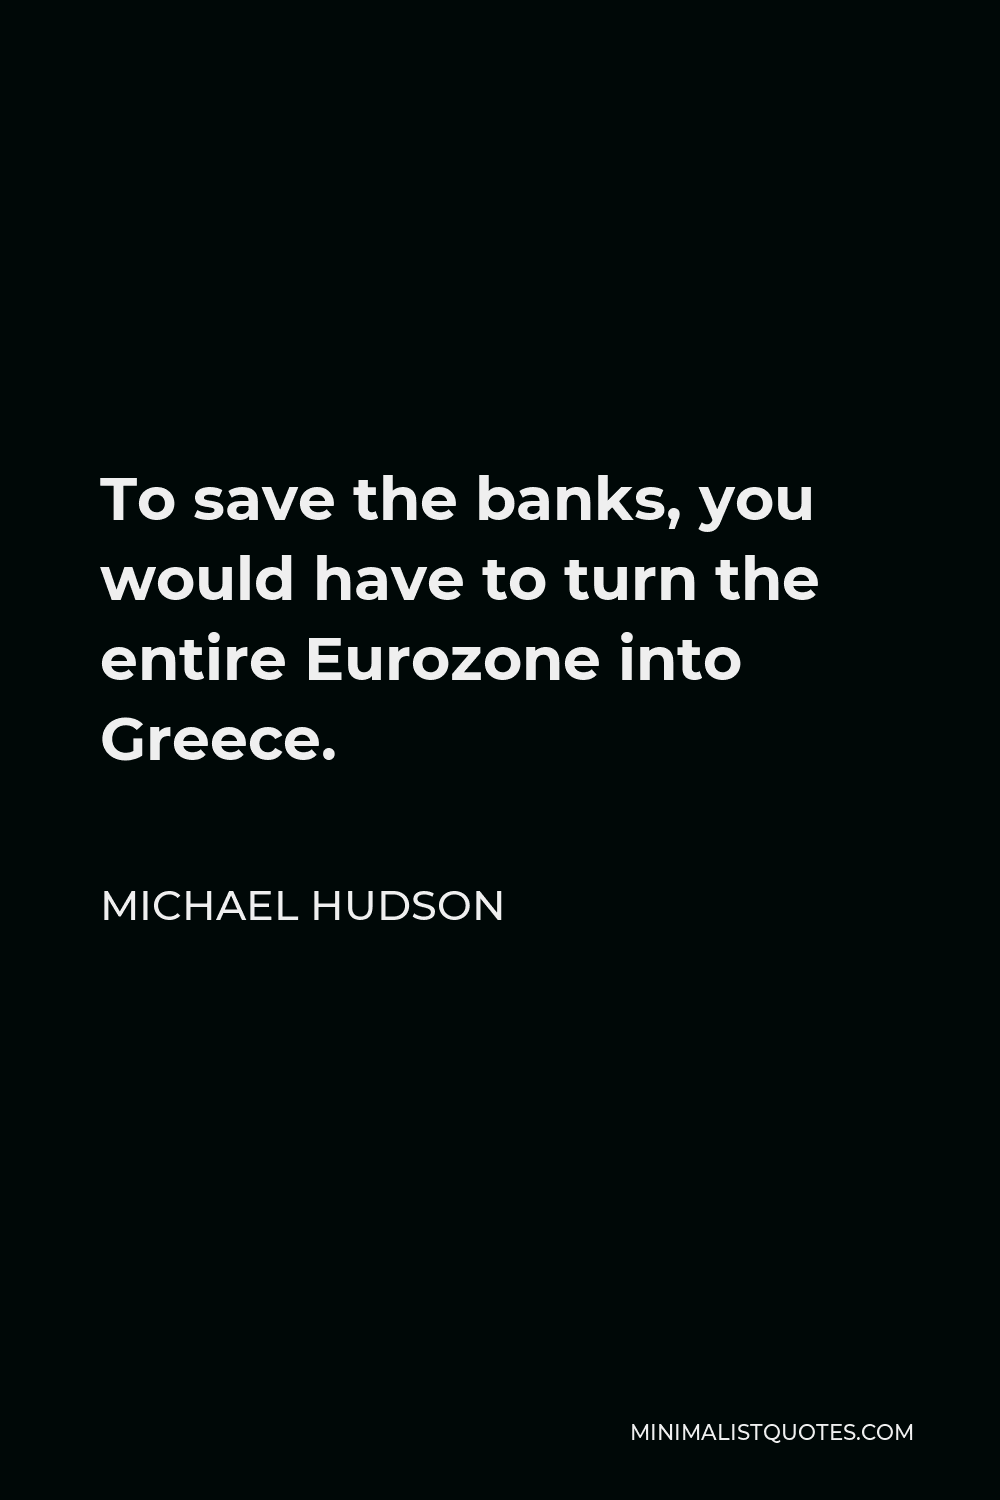 Michael Hudson Quote - To save the banks, you would have to turn the entire Eurozone into Greece.